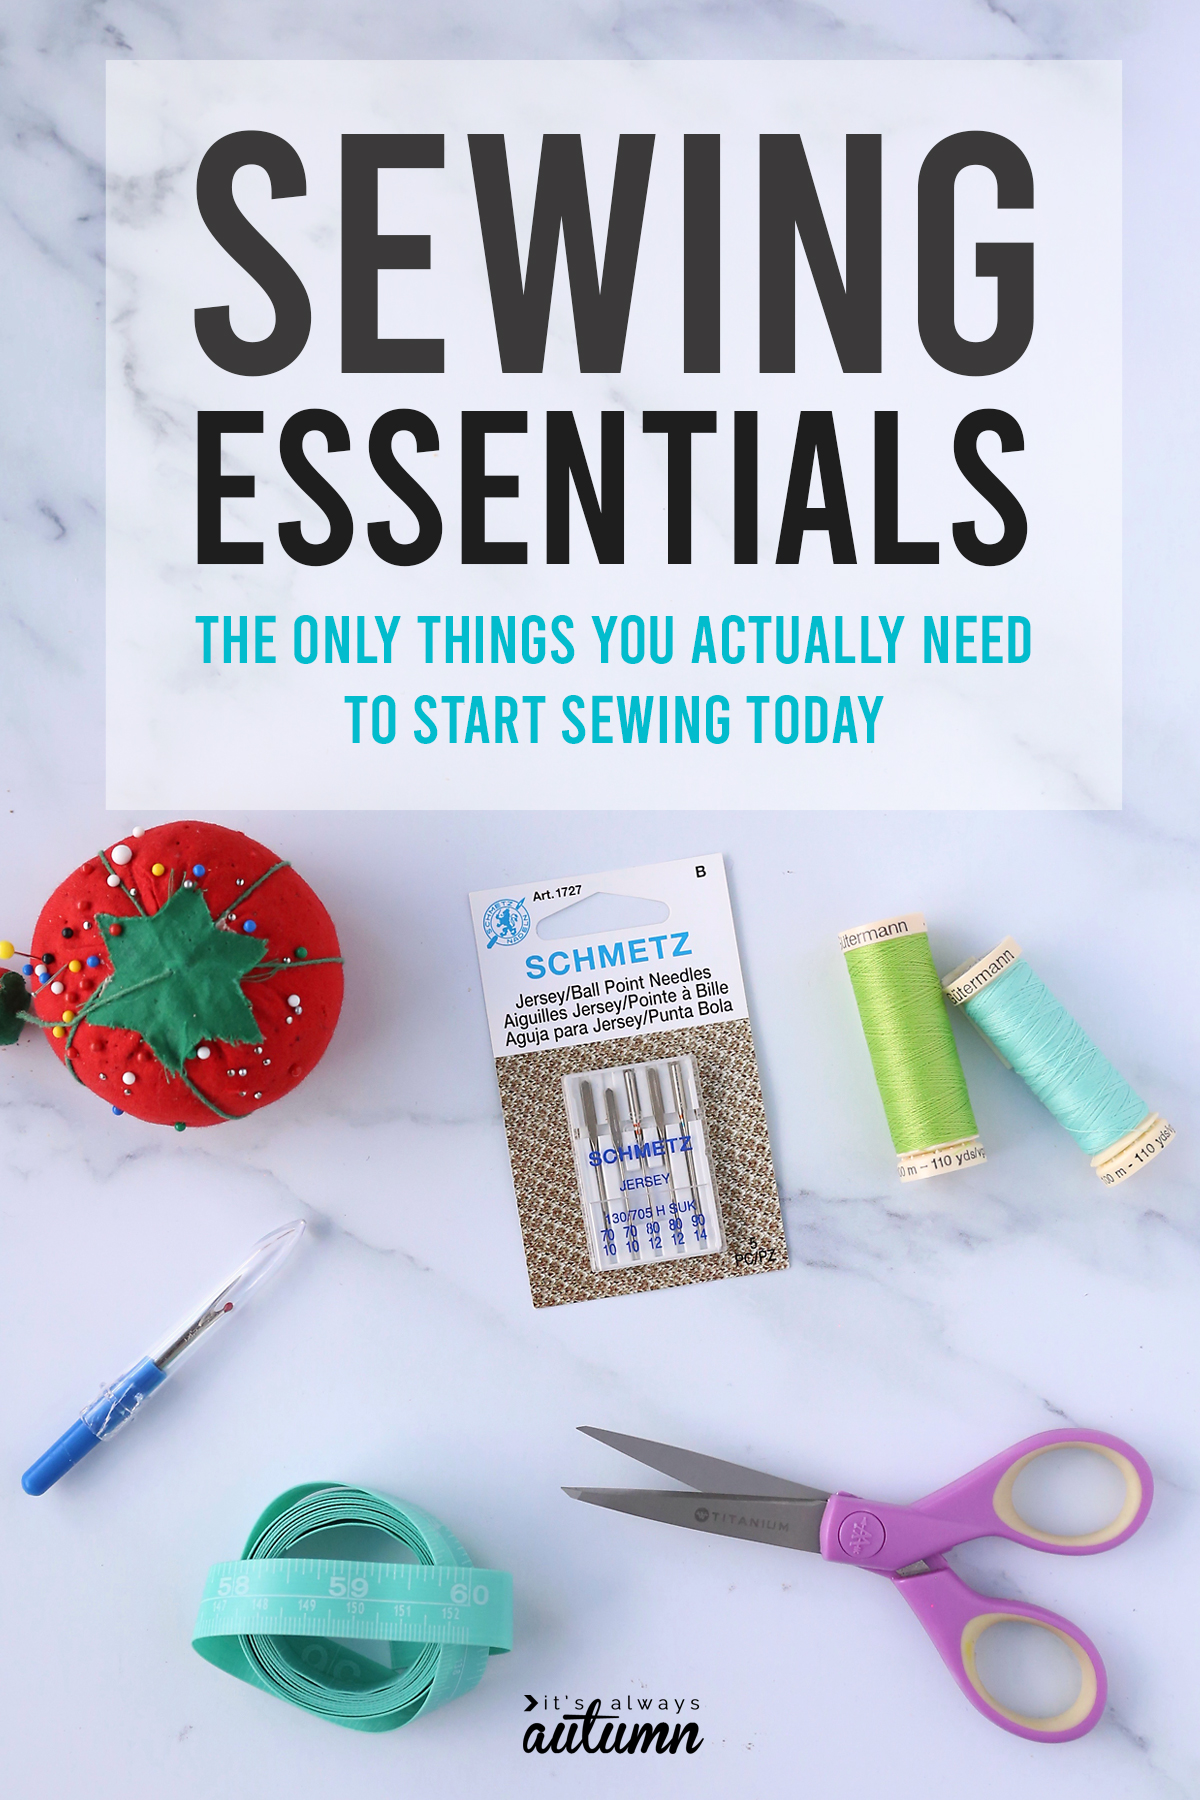 You DON'T need a huge amount of supplies to start sewing - just these sewing essentials.